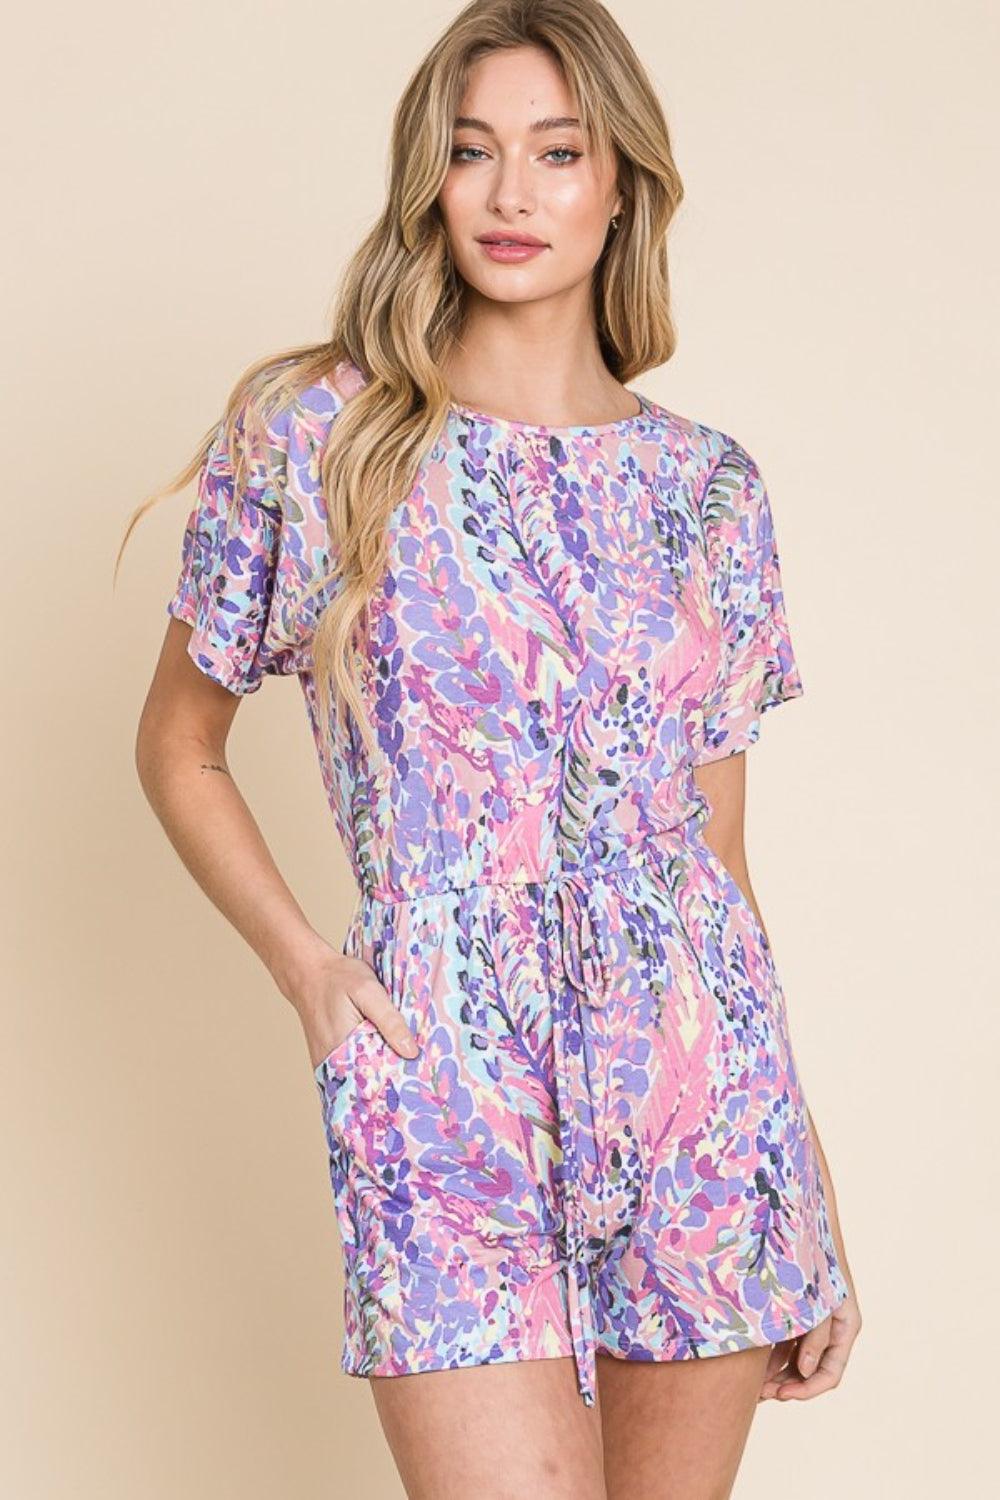 BOMBOM Print Short Sleeve Romper with Pockets - Anchored Feather Boutique